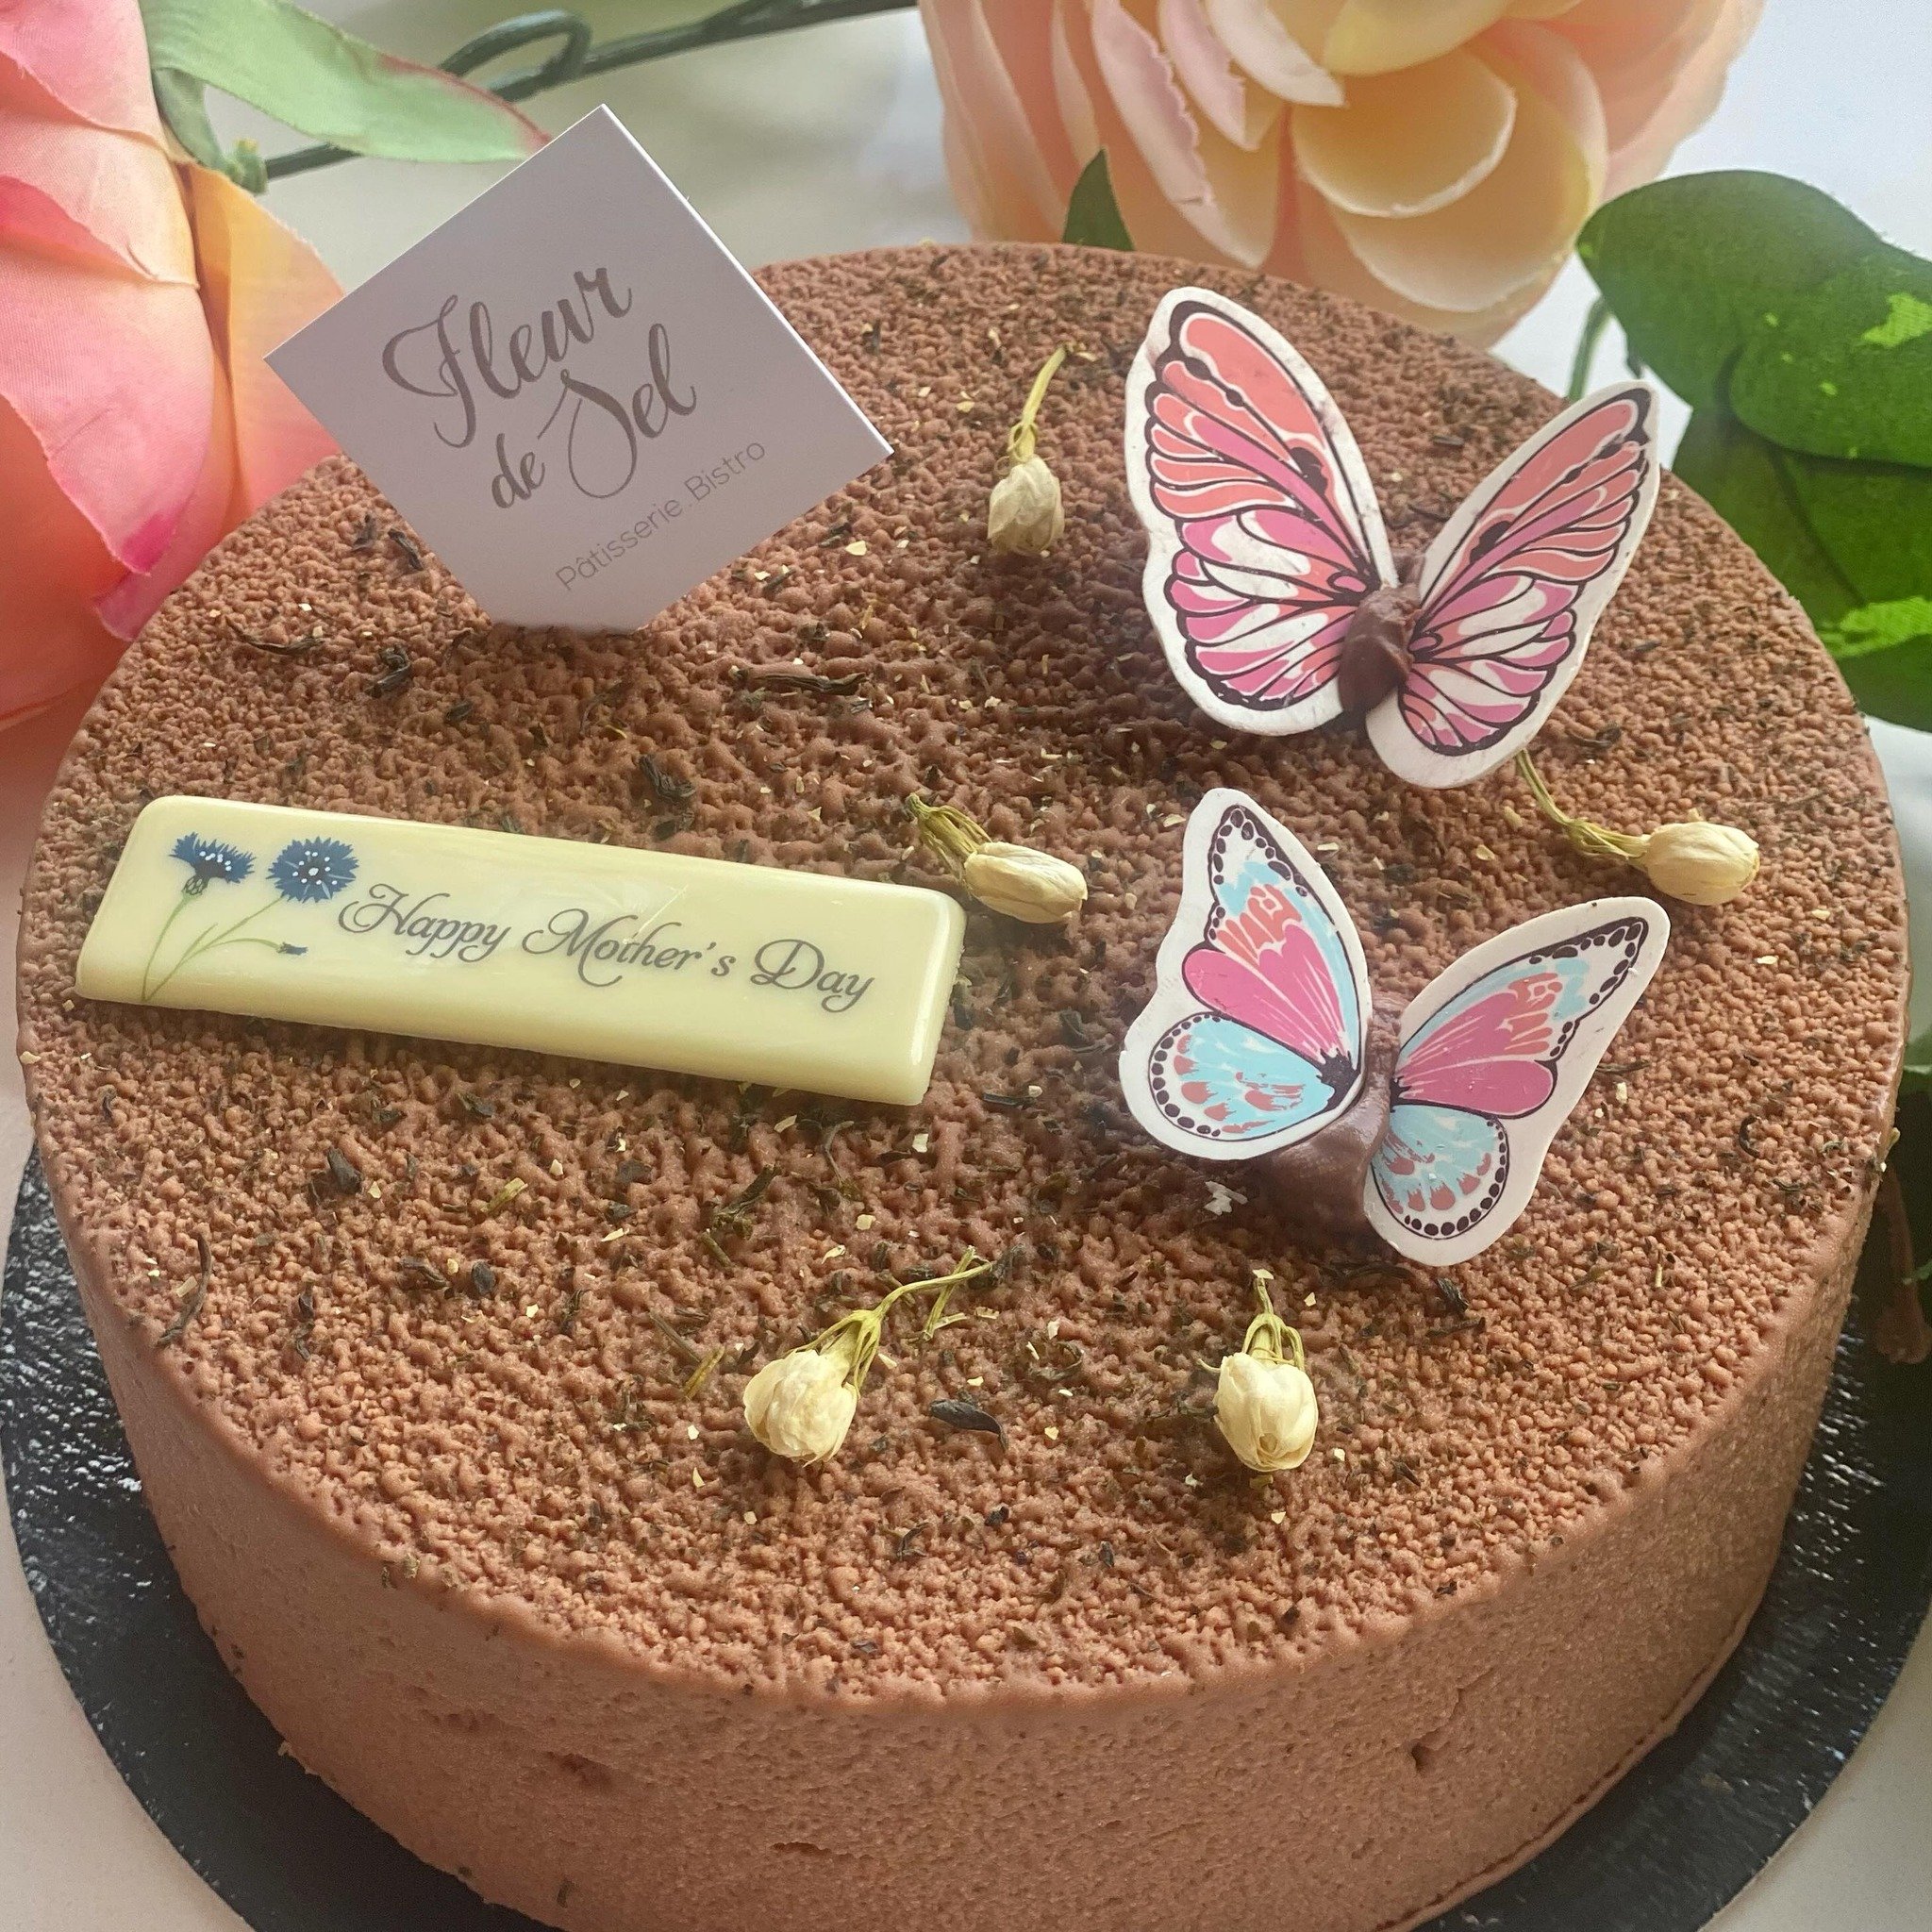 Our Mother&rsquo;s Day Special:
Chocolate Jasmine cake. Available in 6inch, 8inch or 10inch. STAY TUNED FOR MORE!
To place your order give us a call (973) 507-9865 or drop us a line orders@fleurdeselchathamnj.com

#fleurdeselchathamnj #chathamnj #mad